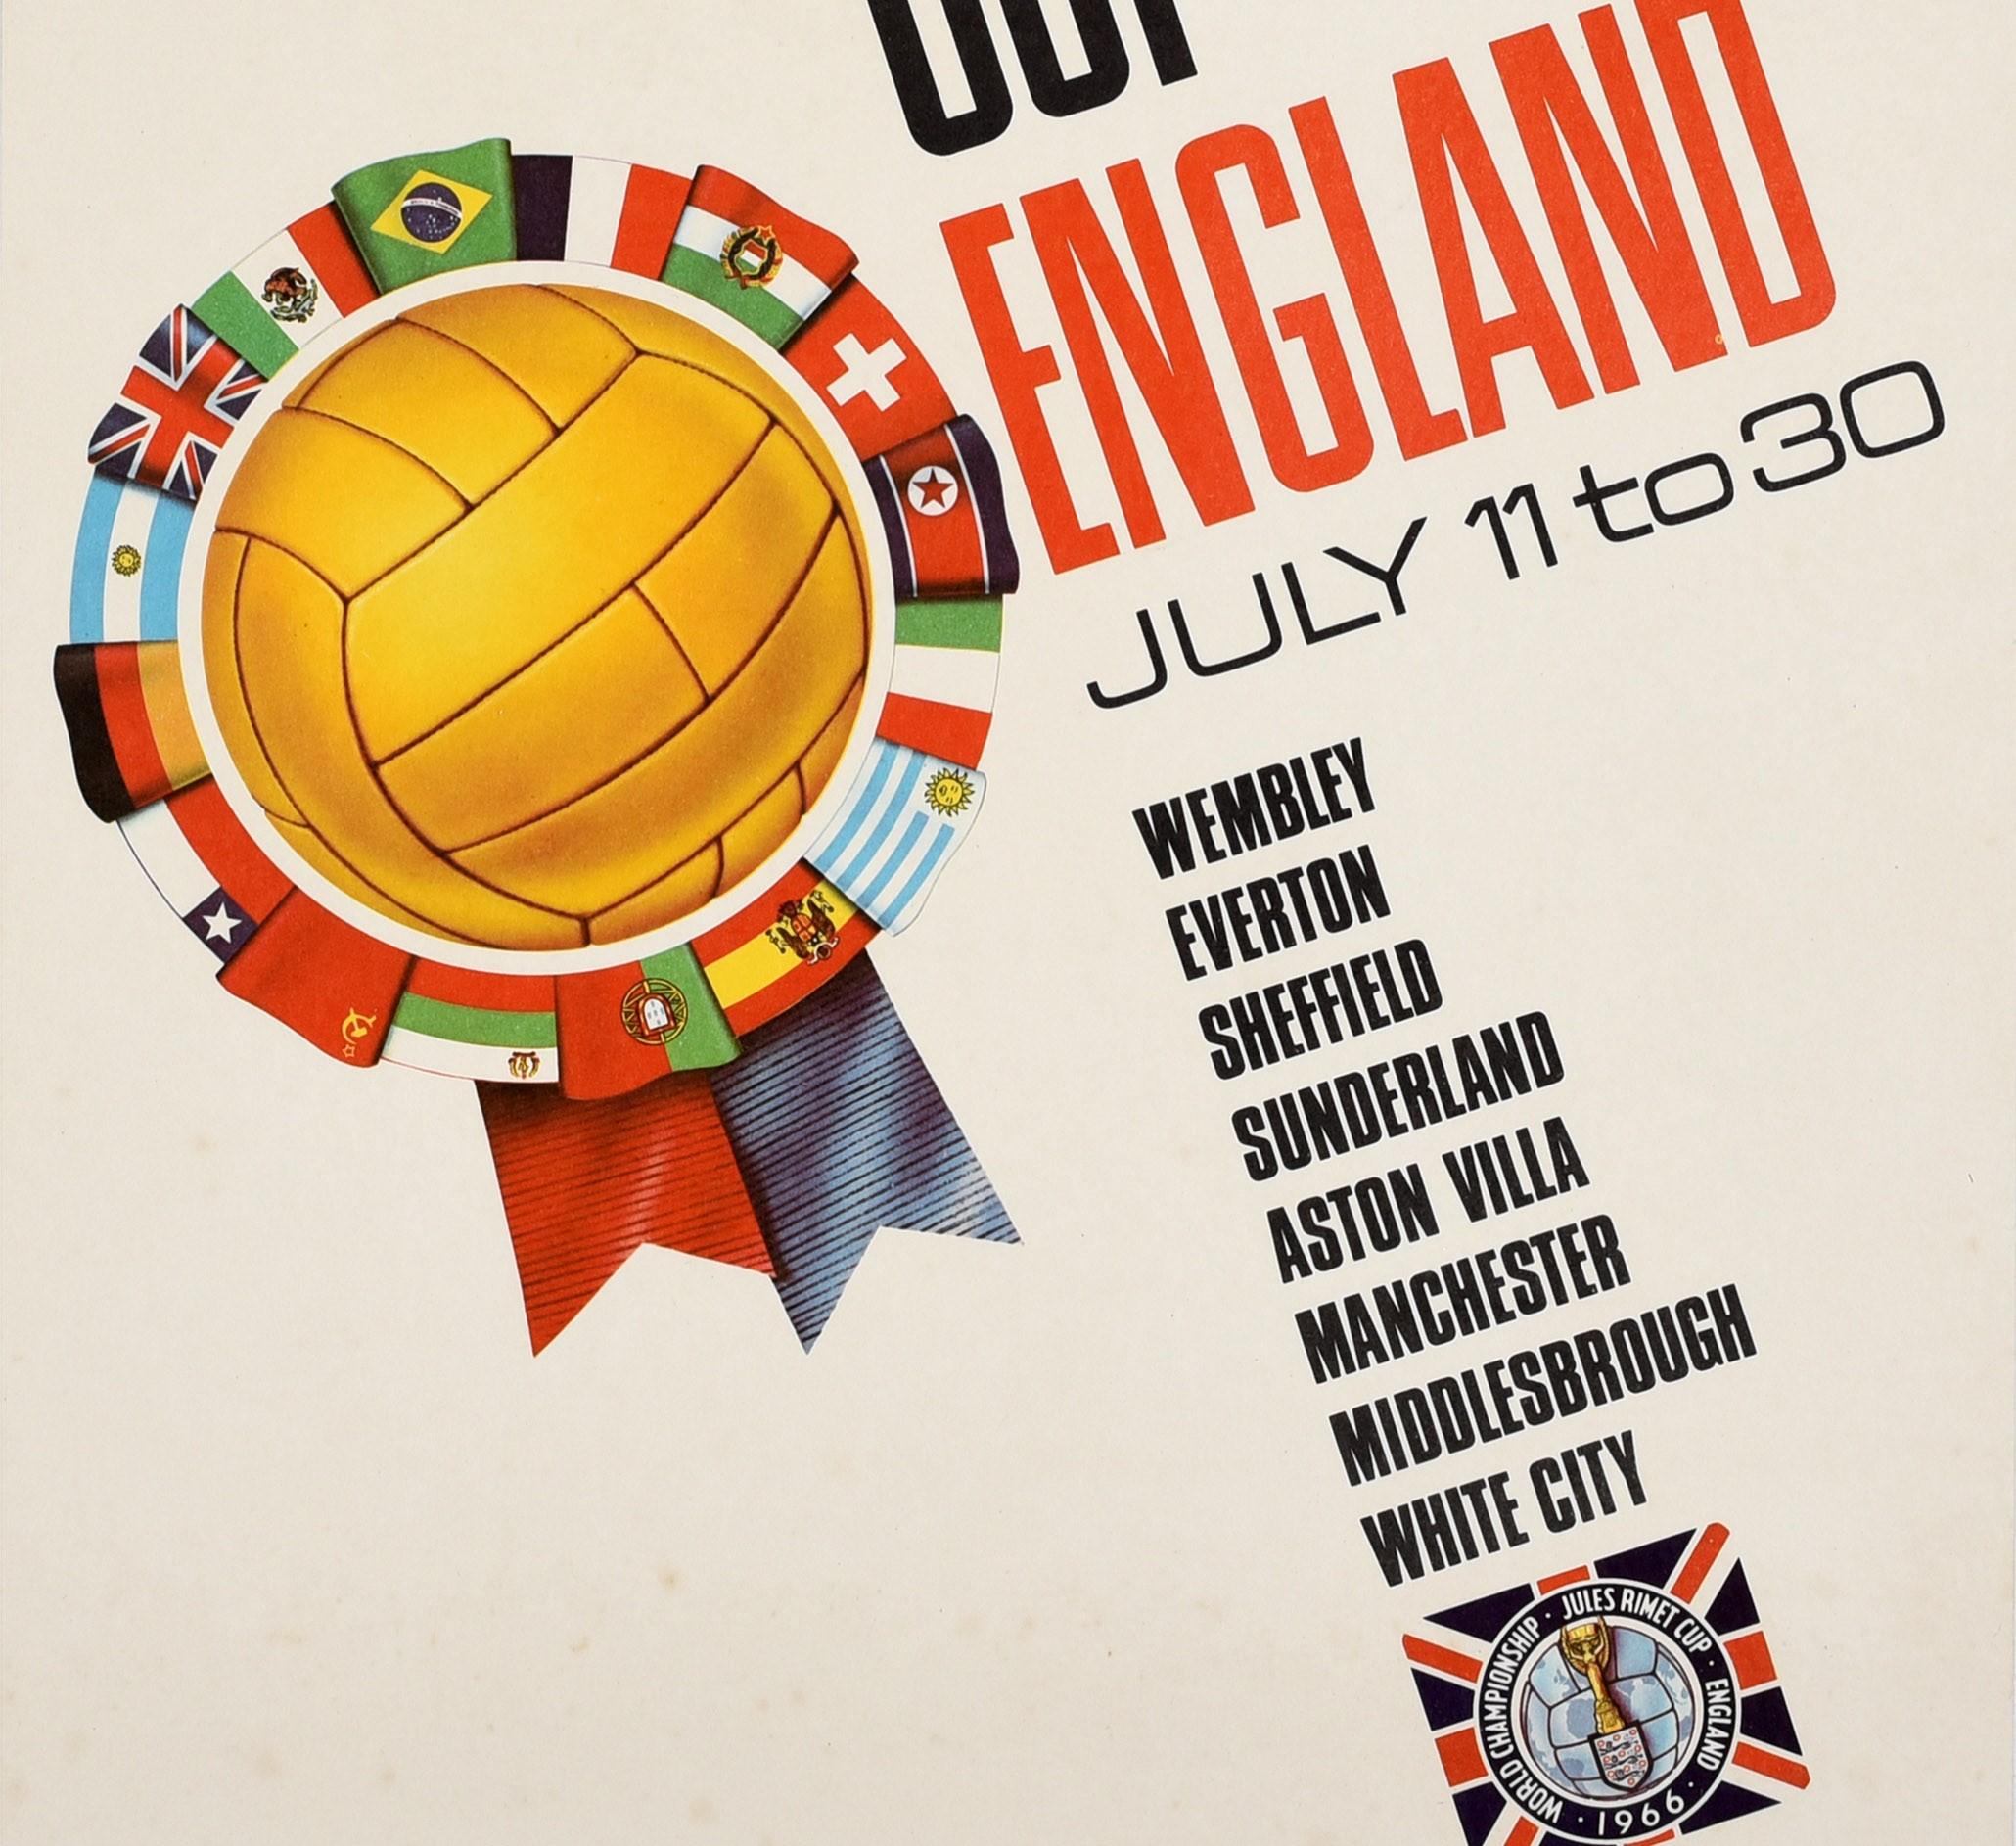 Original vintage sport advertising poster for the 1966 World Cup Finals that took place in England from July 11 to 30 at stadiums in Wembley Everton Sheffield Sunderland Aston Villa Manchester Middlesbrough and White City featuring a great